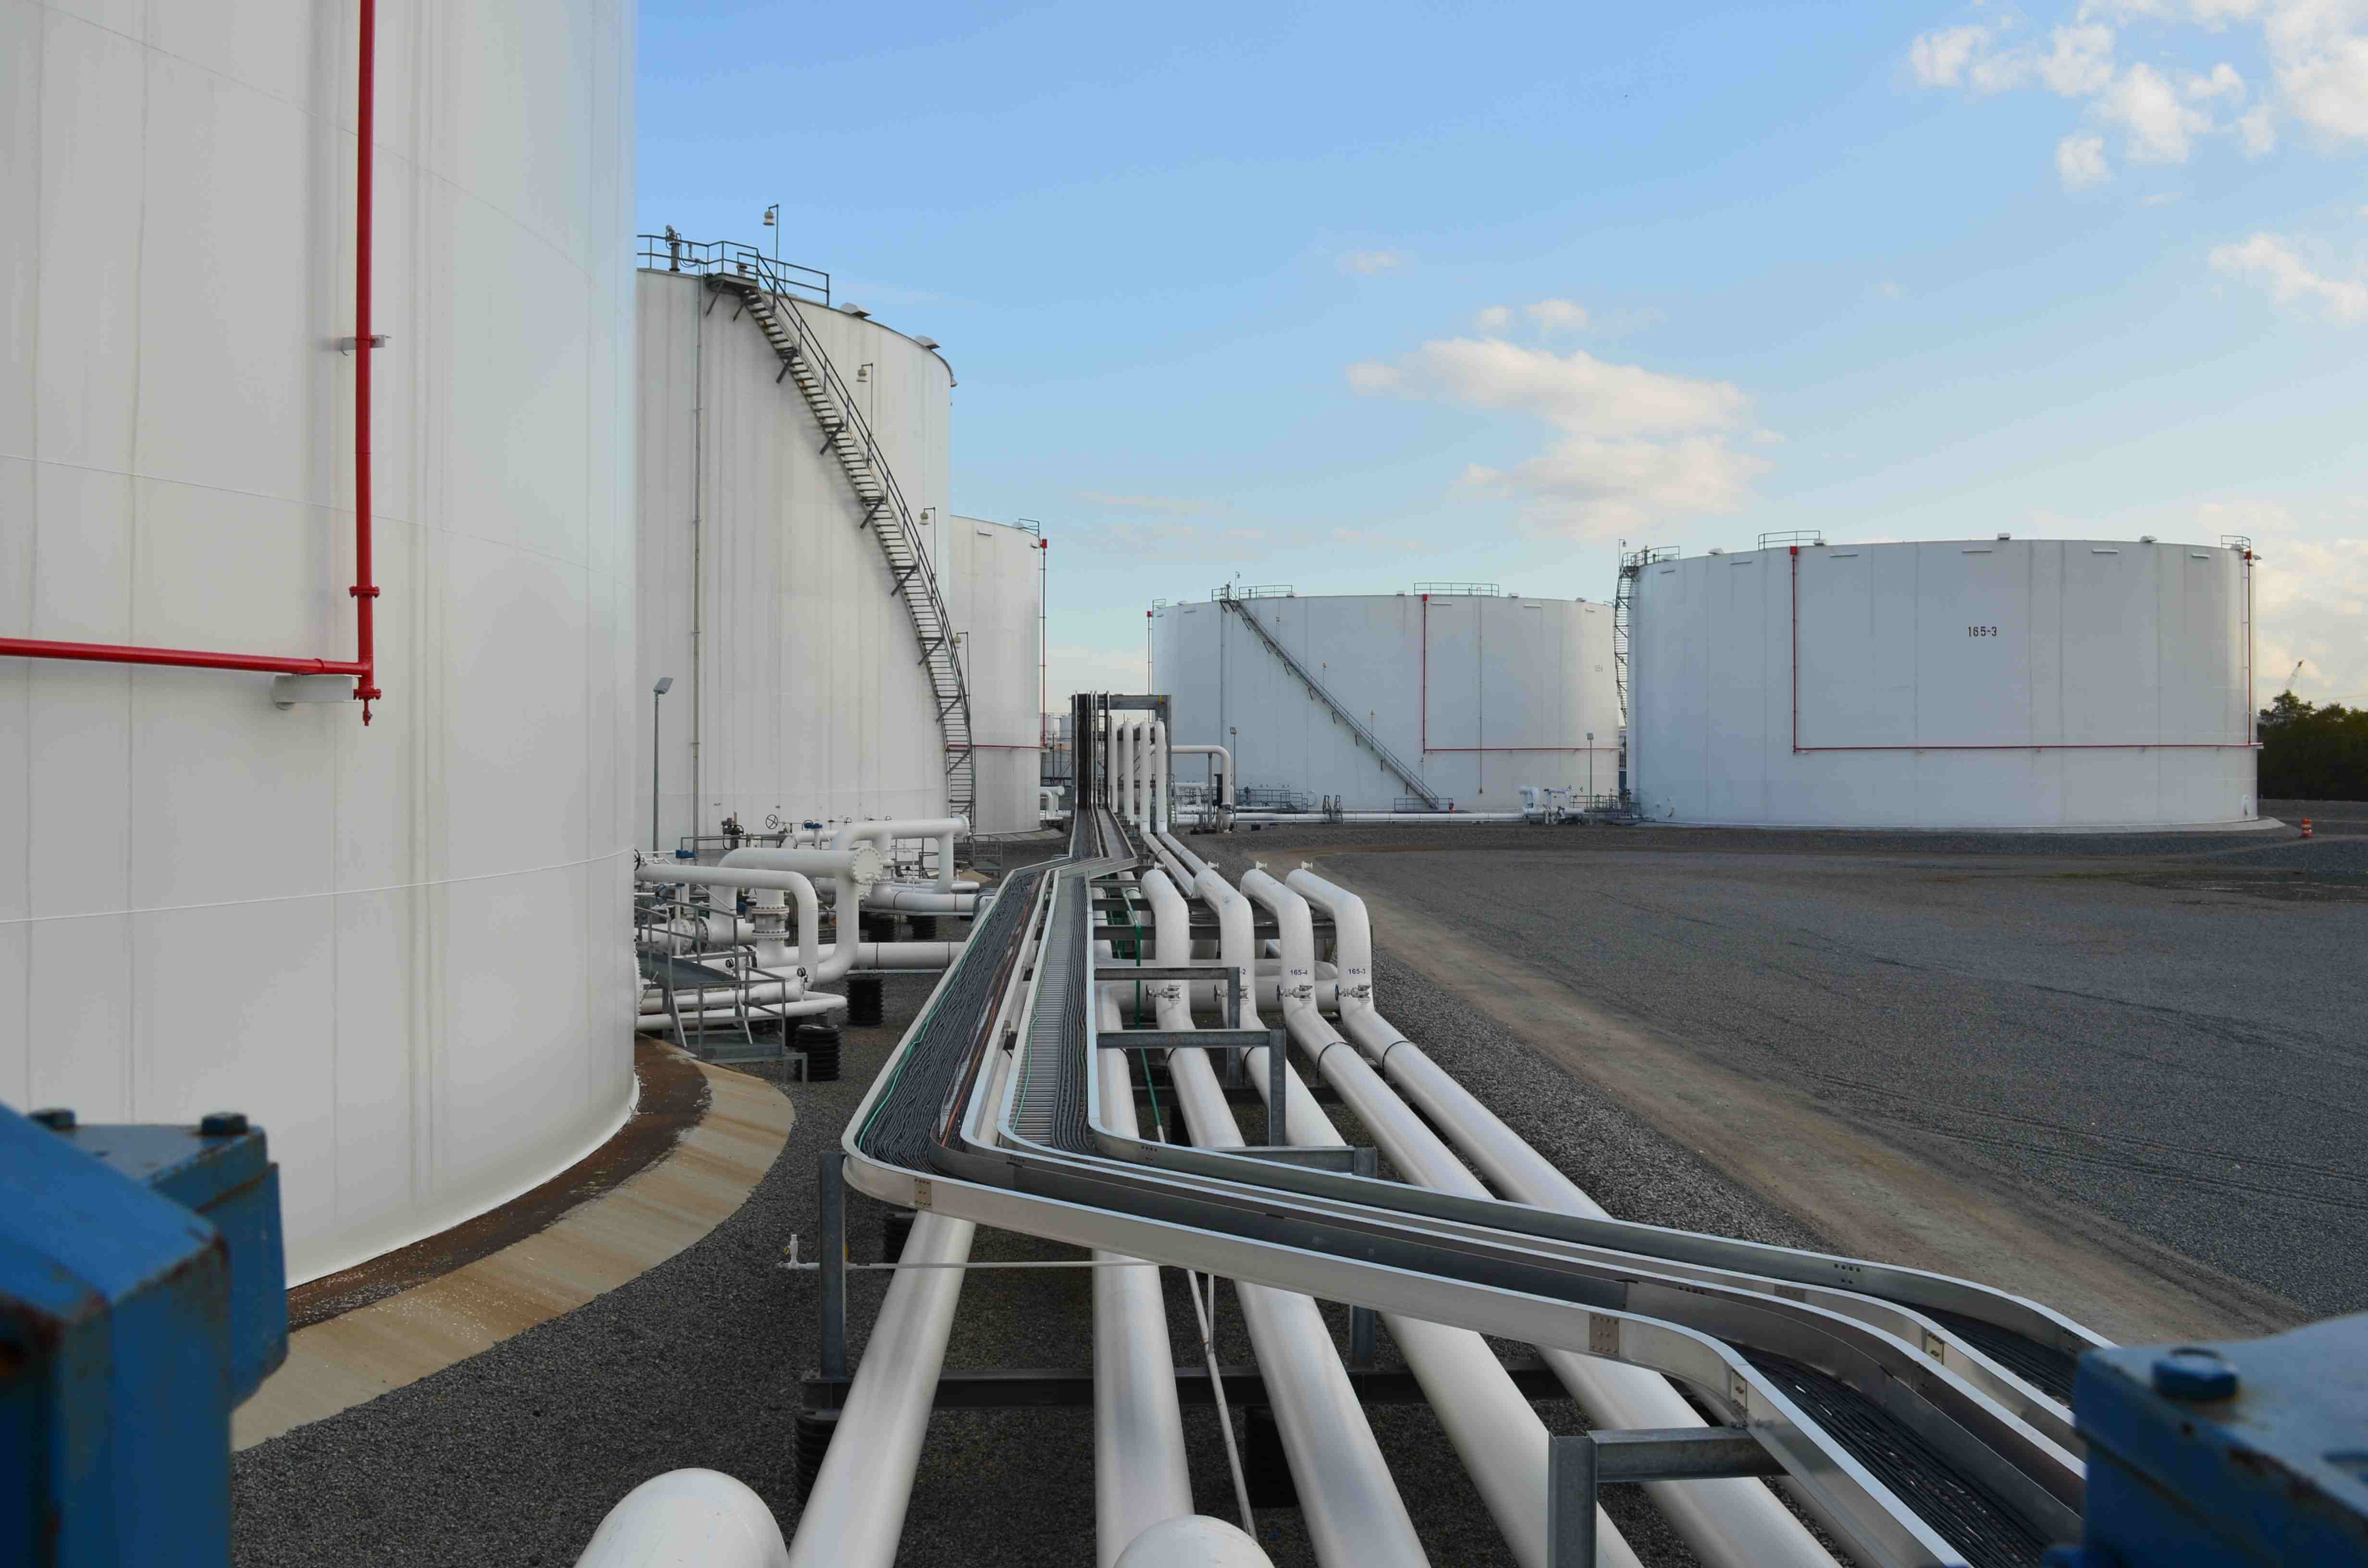 Location, Location, Location: Considerations for Selection of a Liquid Terminal Site